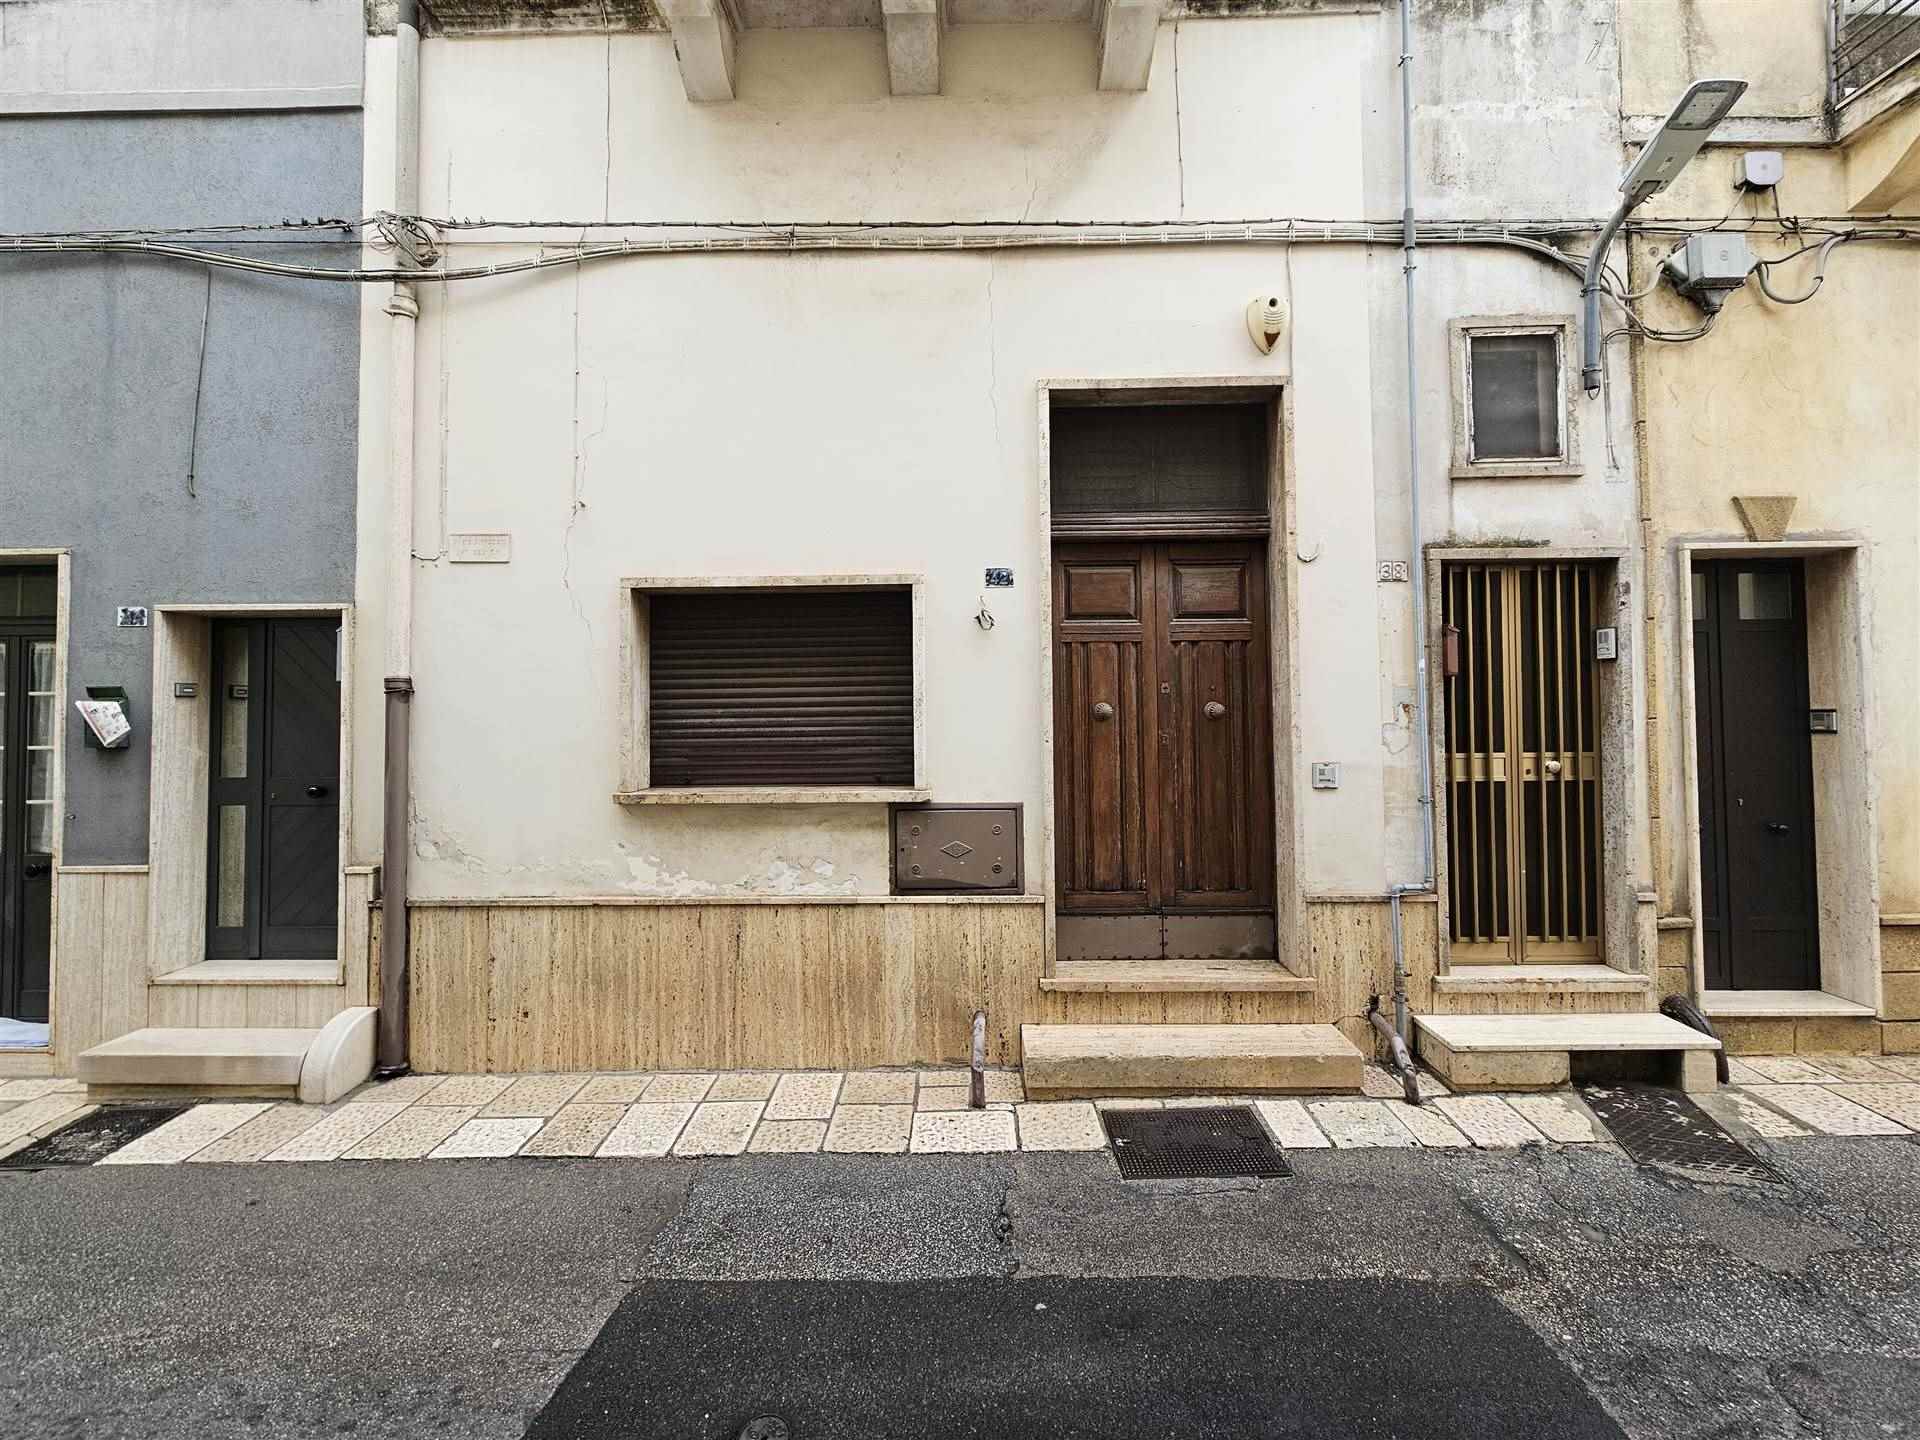 PORTA PICCOLA, MESAGNE, Single house for sale of 73 Sq. mt., Be restored, Heating Non-existent, placed at Ground on 1, composed by: 3.5 Rooms, Little 